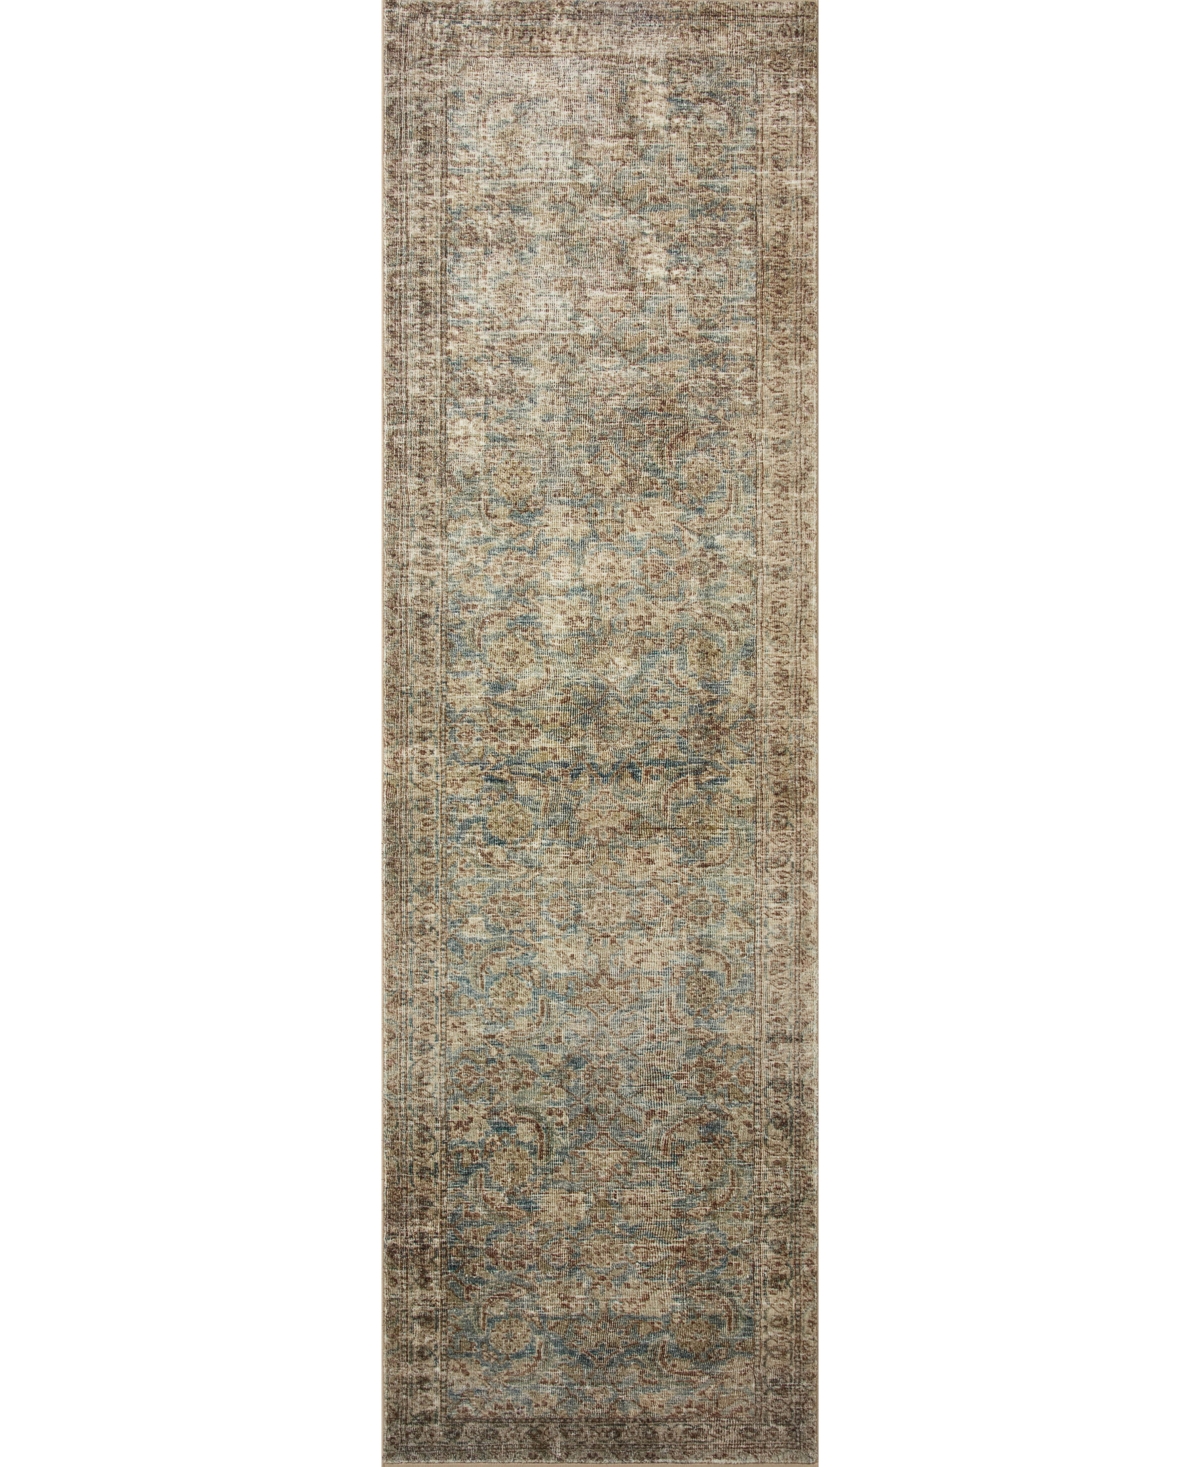 Amber Lewis X Loloi Morgan Mog-04 2'3" X 9'6" Runner Area Rug In Turquoise